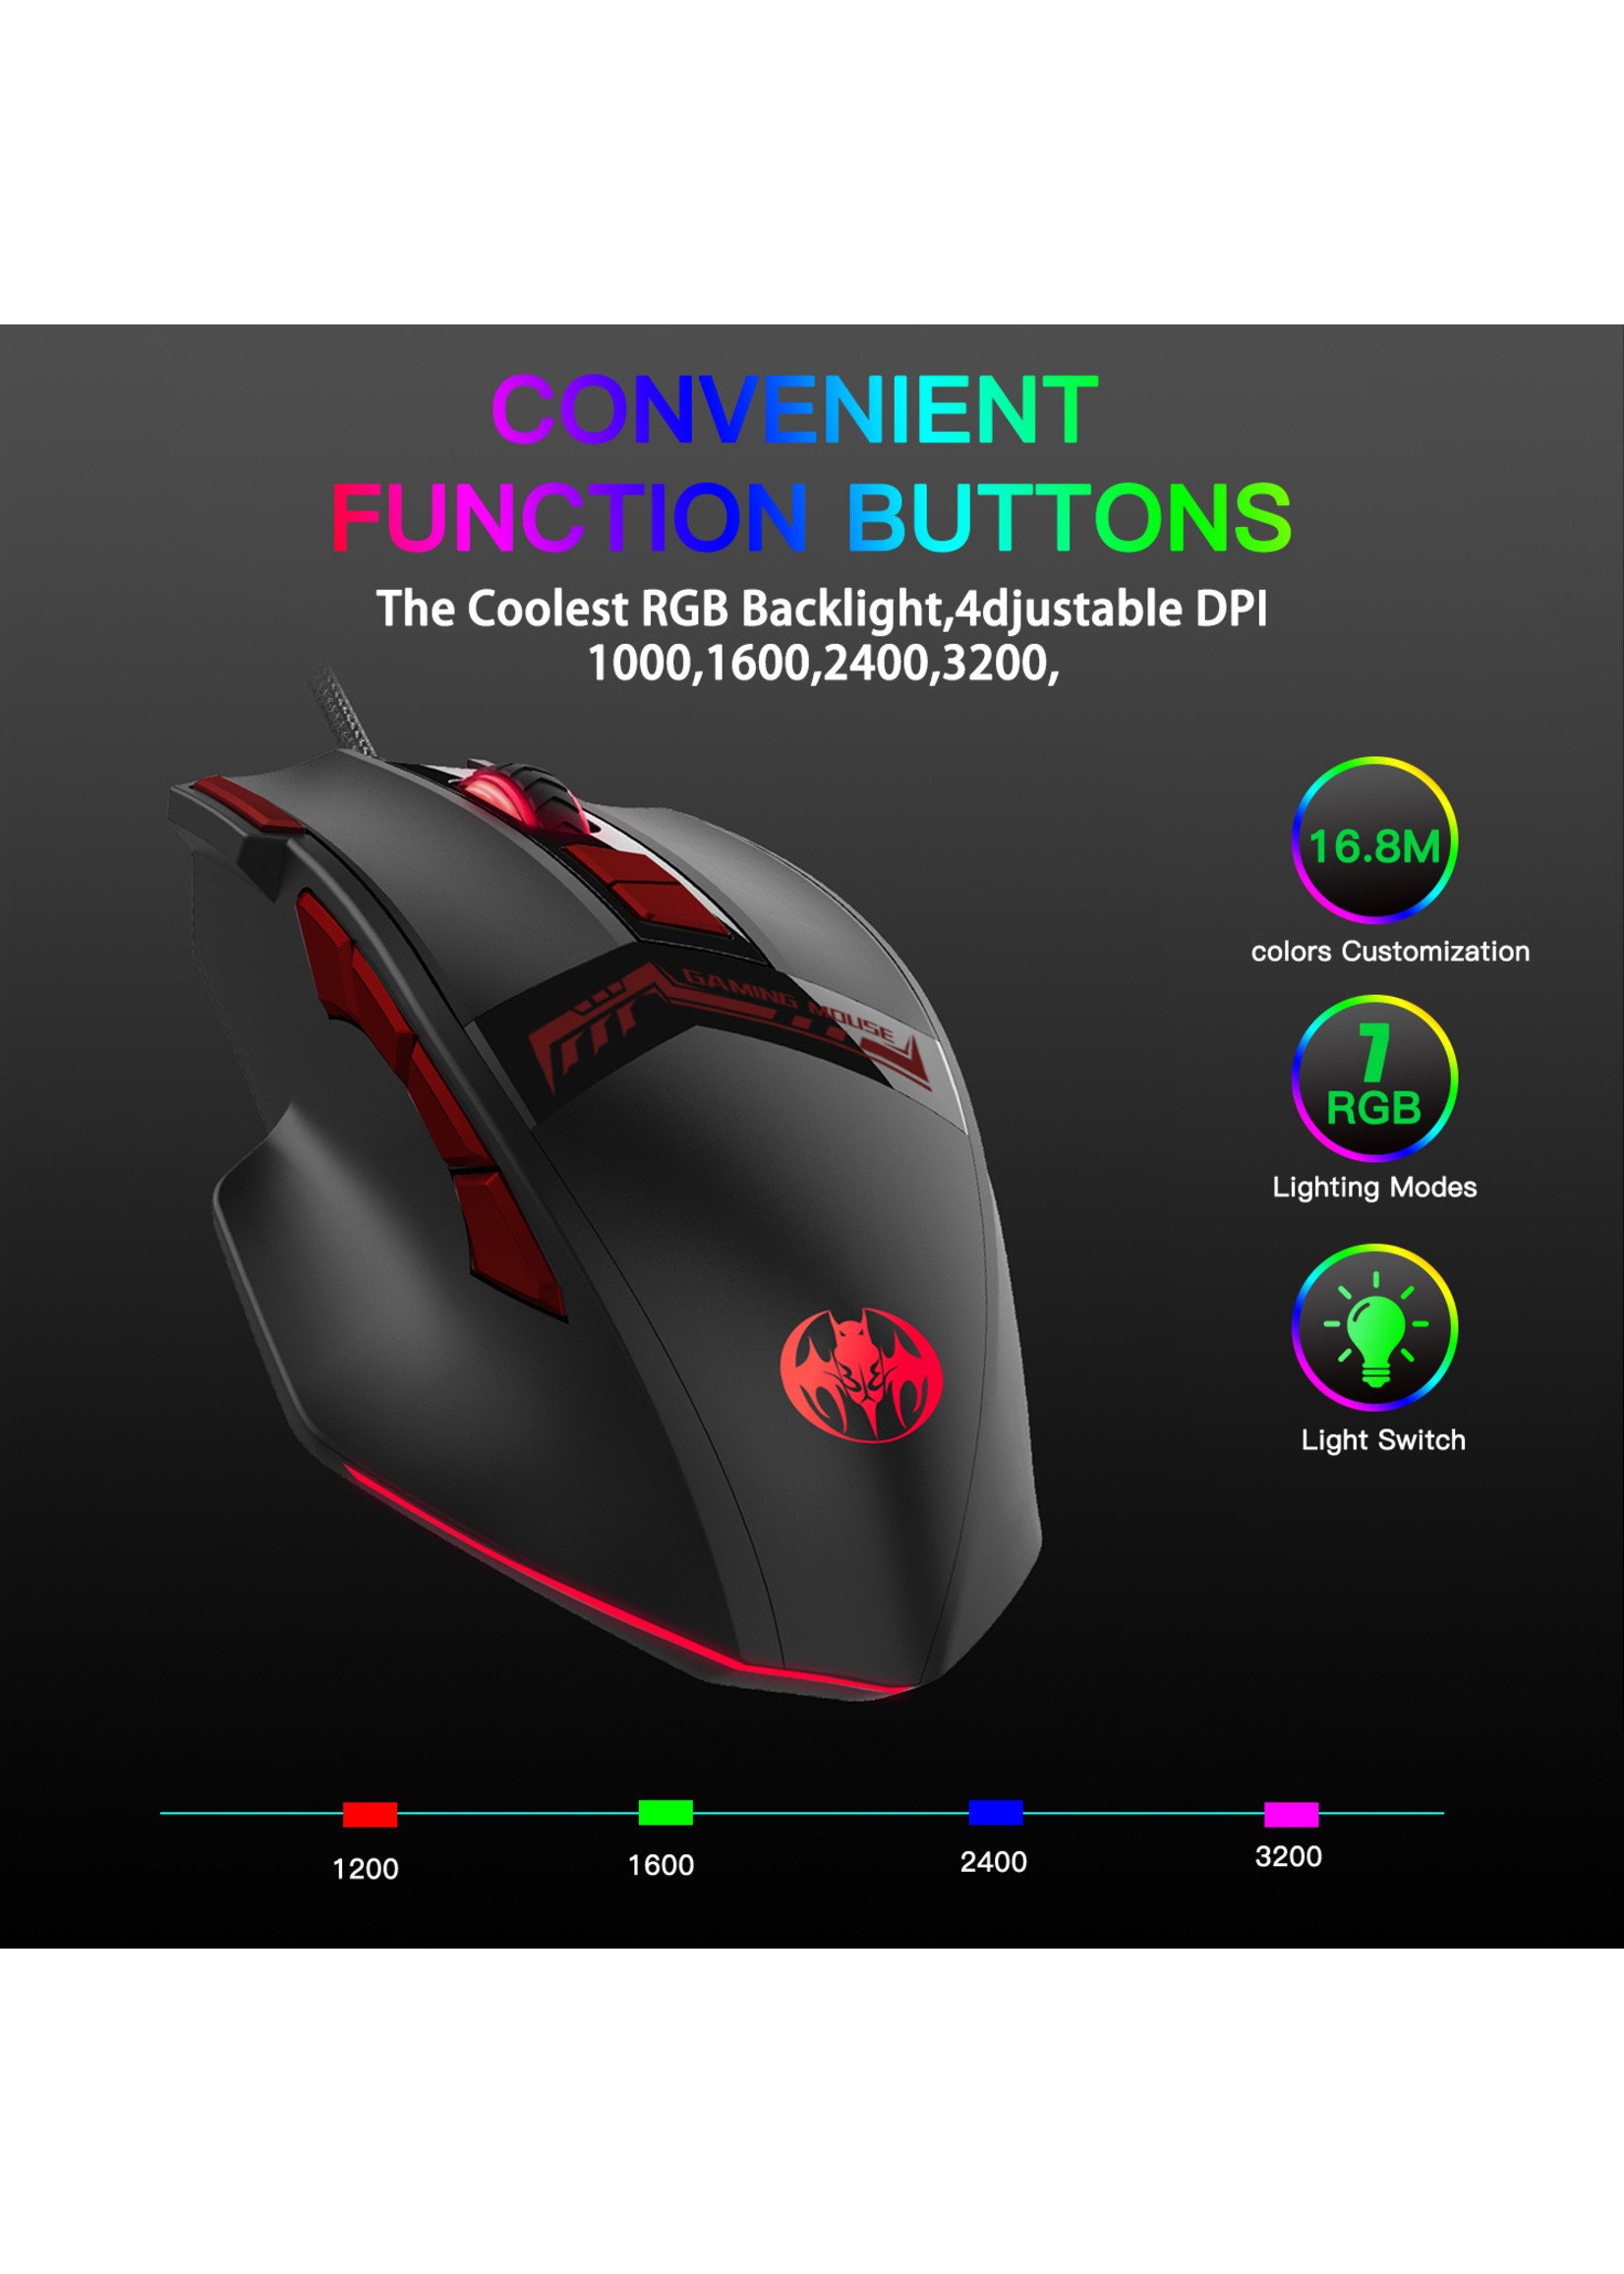 Gaming mouse with RGB lighting - 10 buttons - 3200 DPI